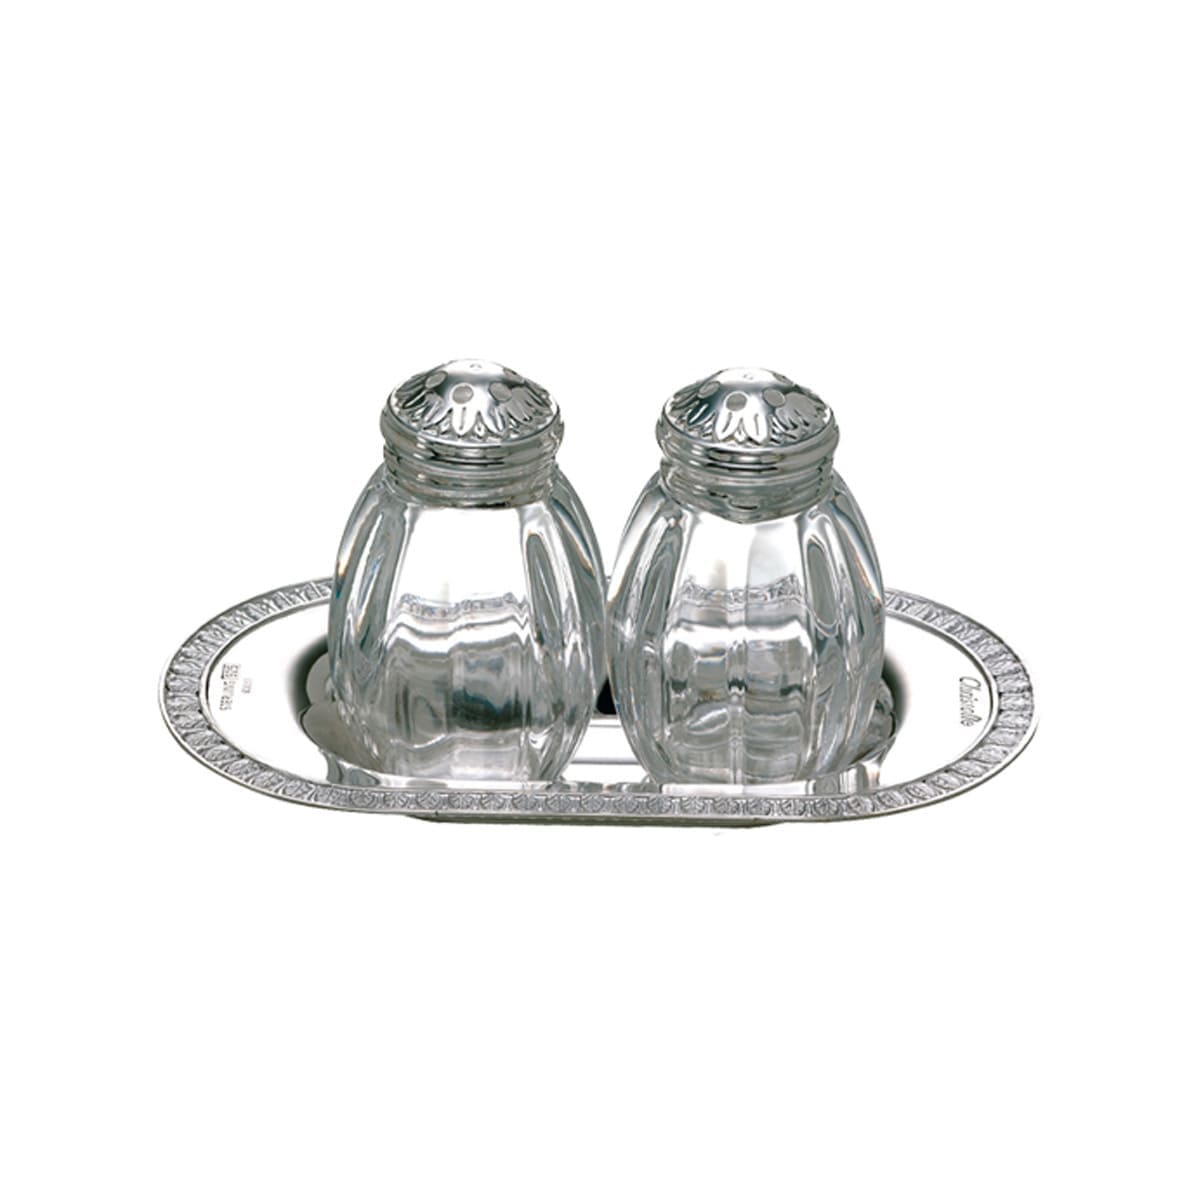 Christofle Malmaison Salt and Pepper Shakers and serving dish